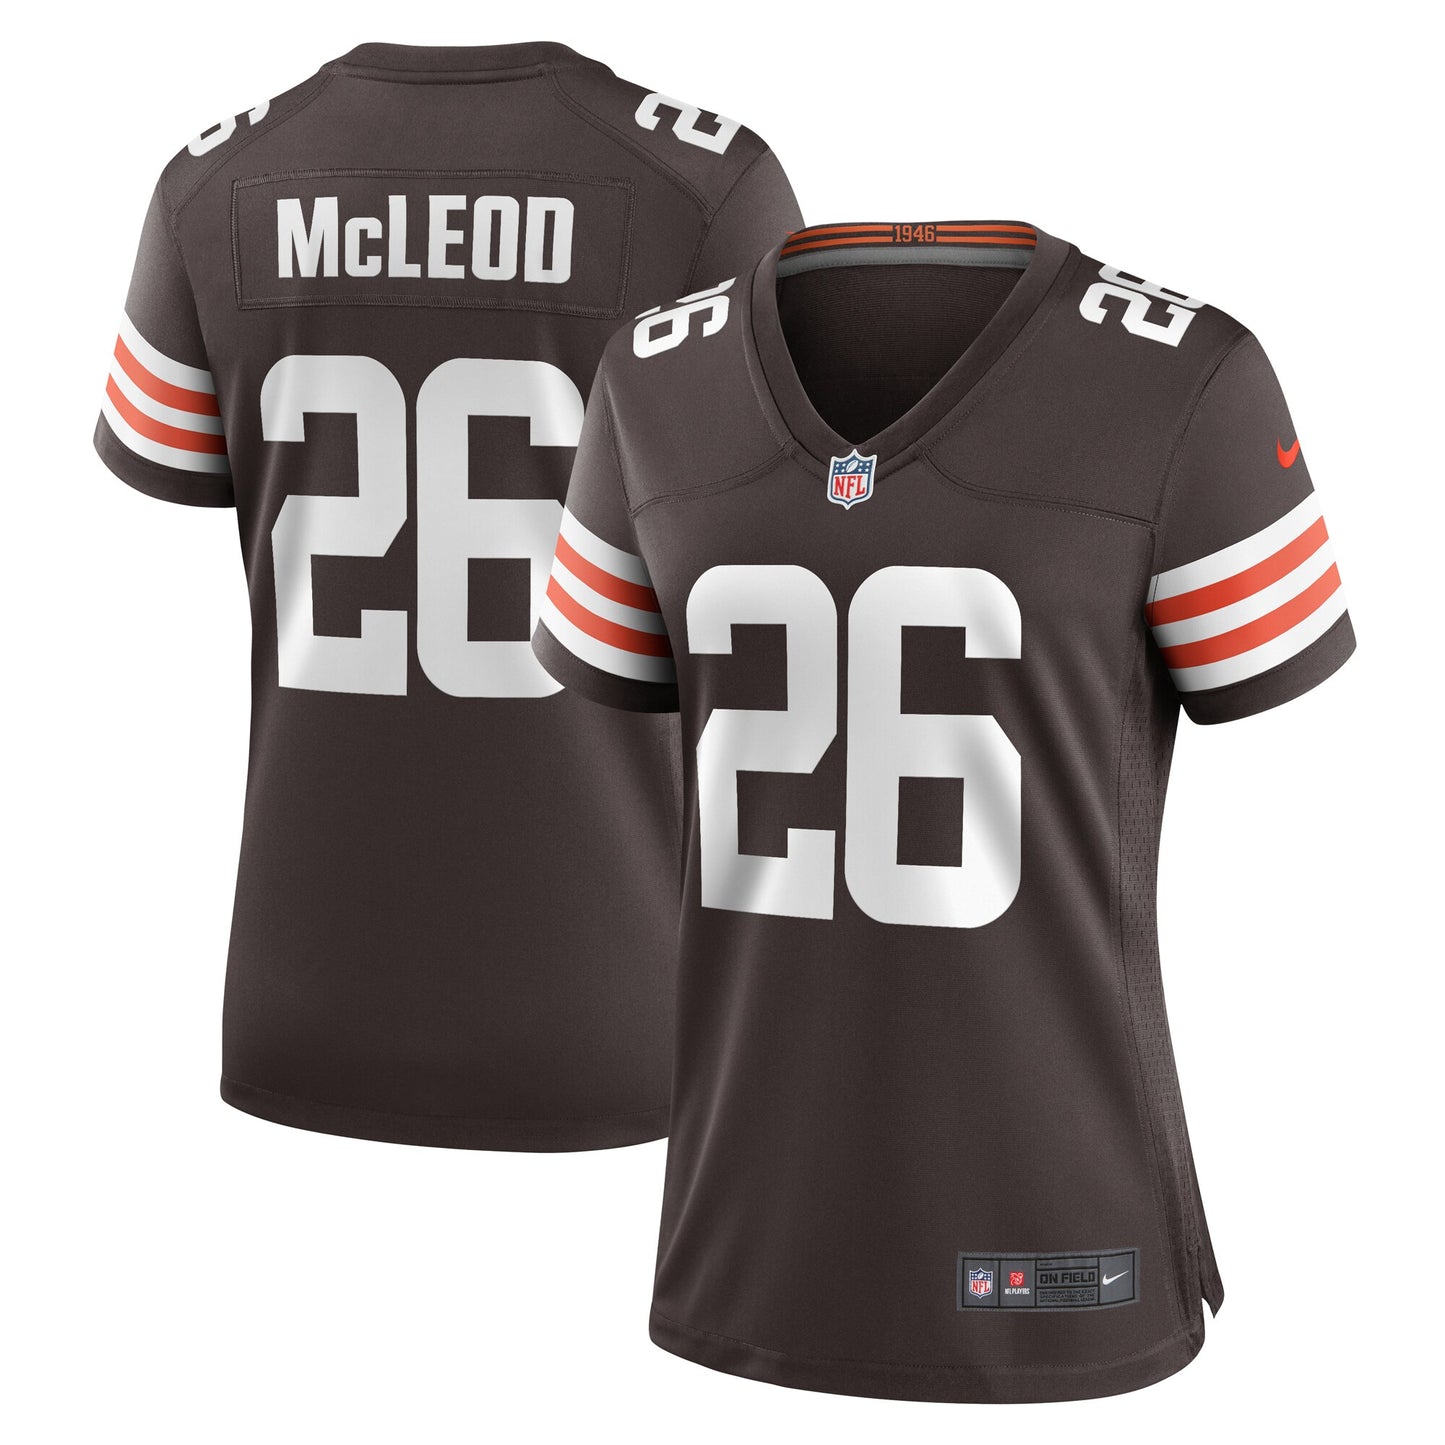 Rodney McLeod Cleveland Browns Nike Women's Team Game Jersey - Brown